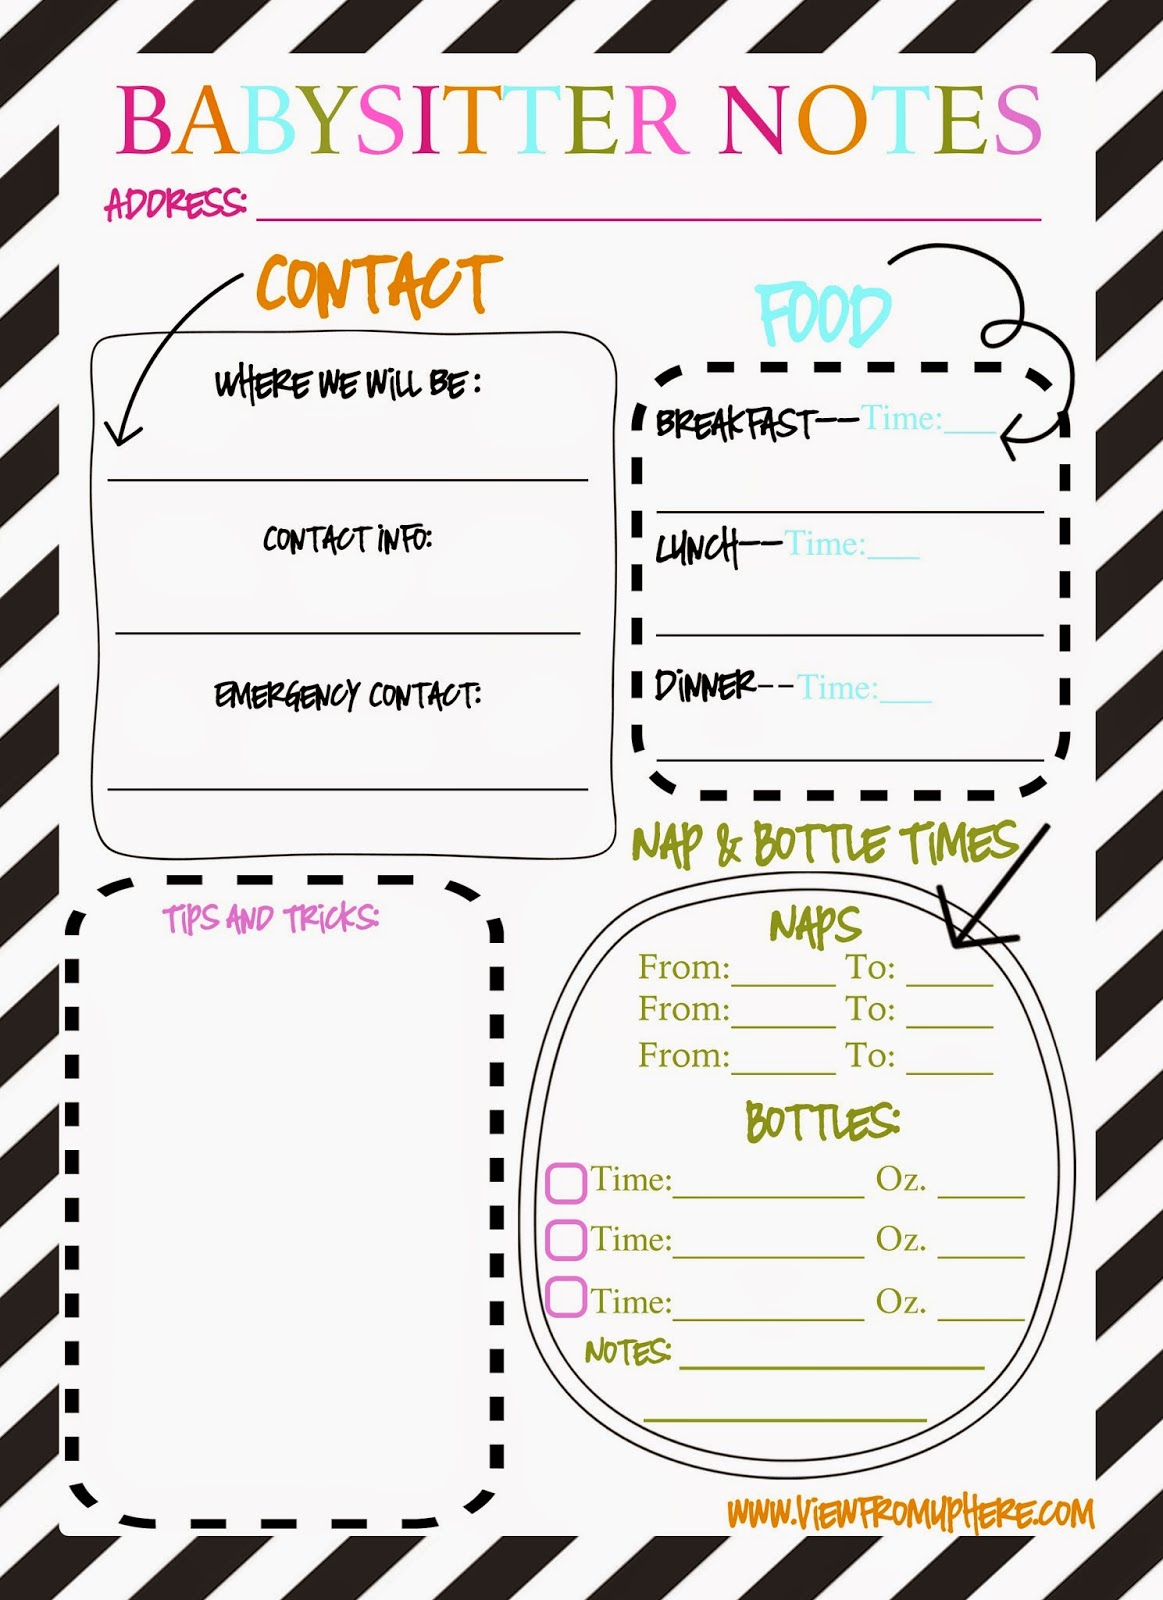 babysitter-notes-printable-the-view-from-up-here